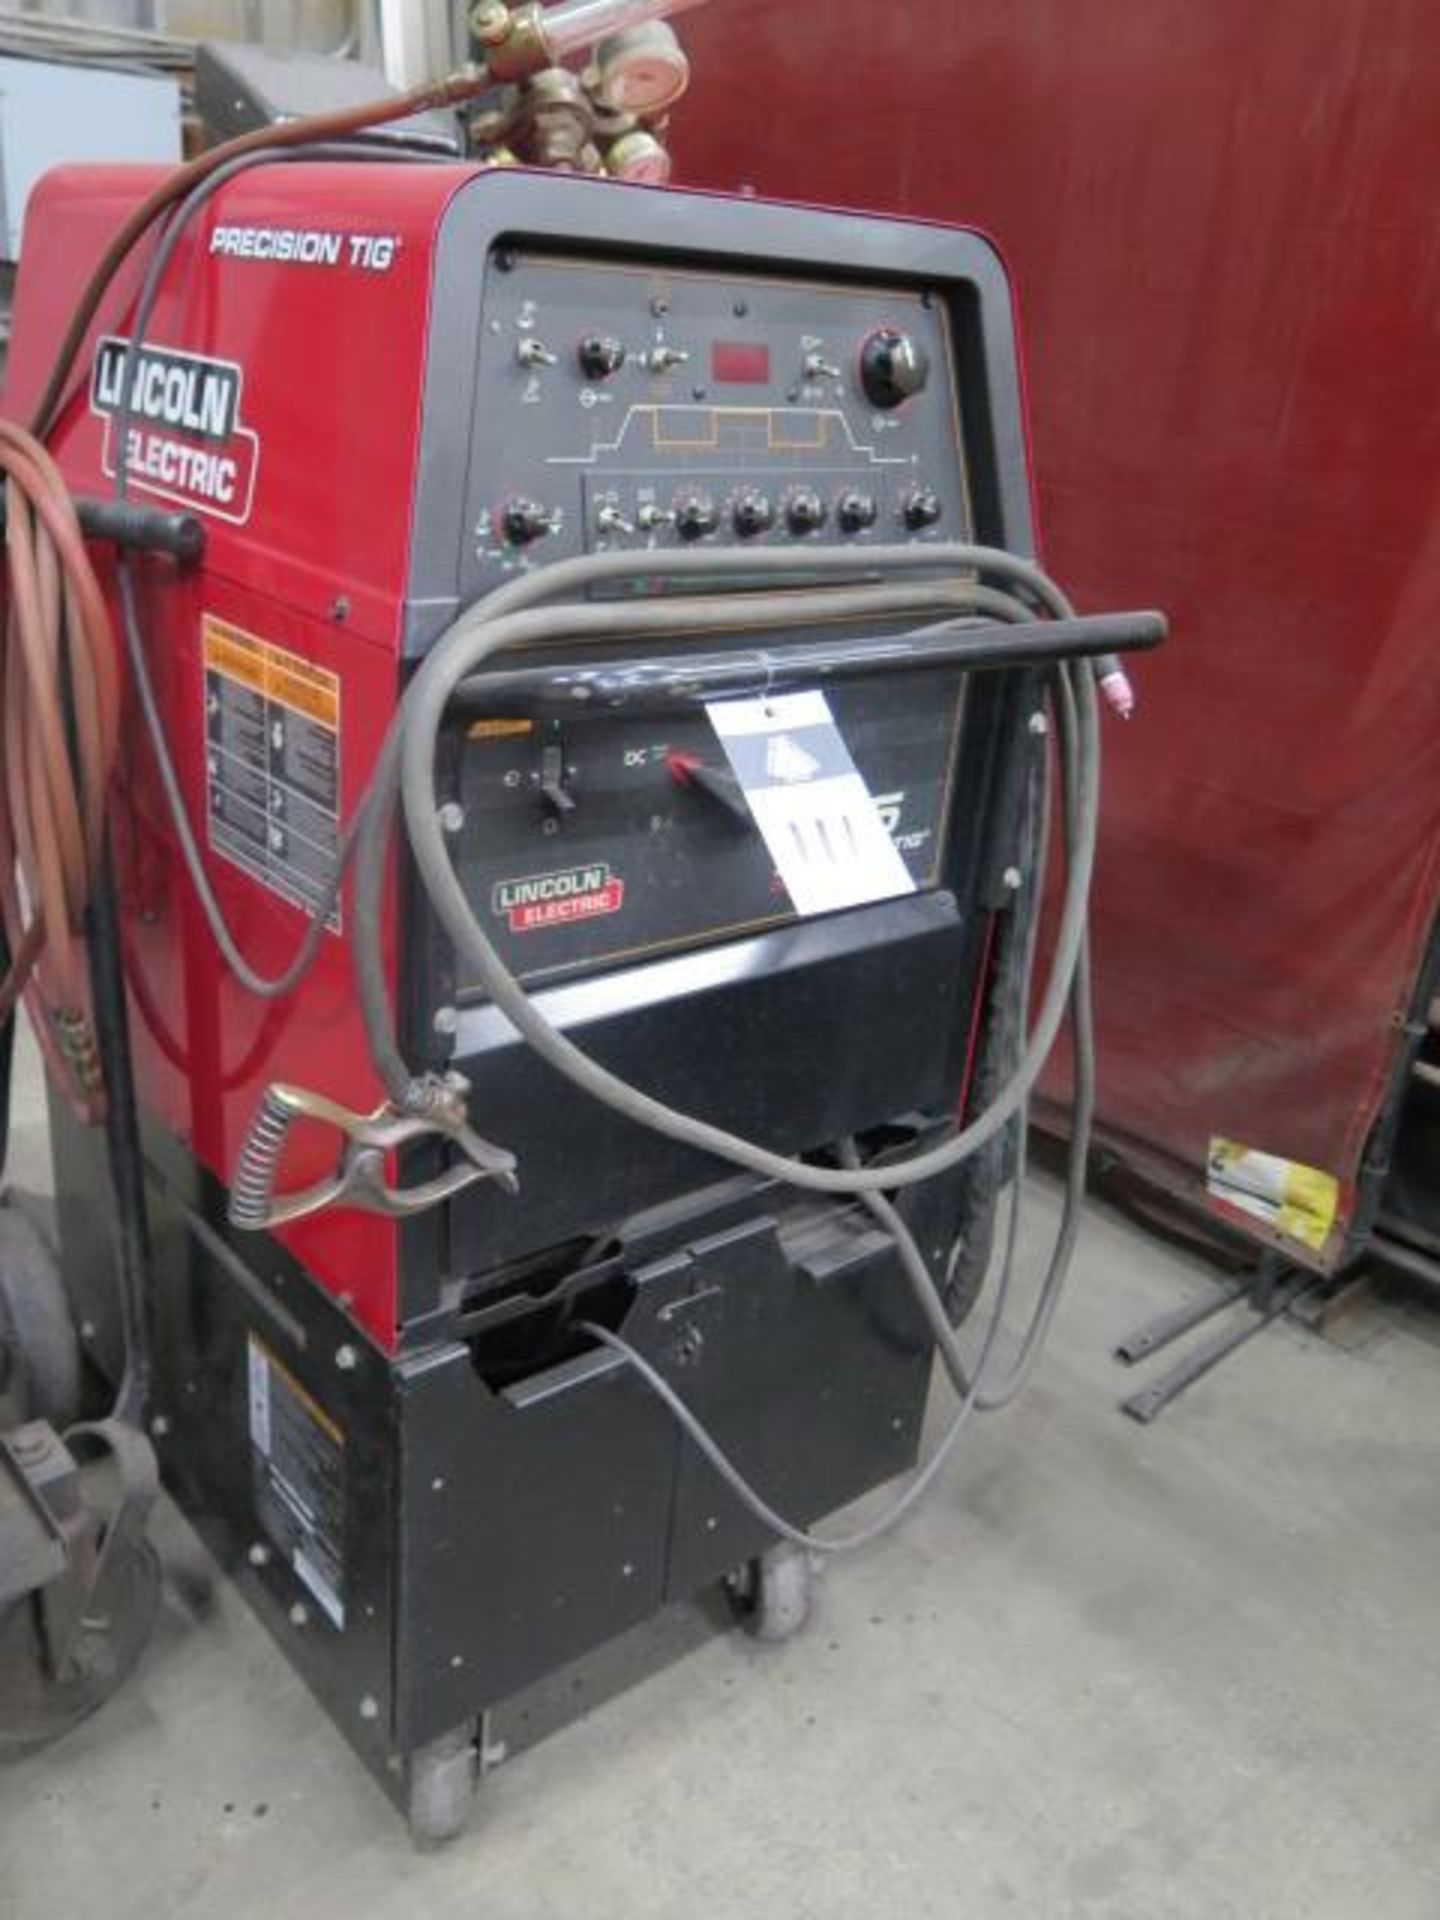 Lincoln Precision TIG 375 Arc Welding Power Source (SOLD AS-IS - NO WARRANTY) - Image 2 of 11